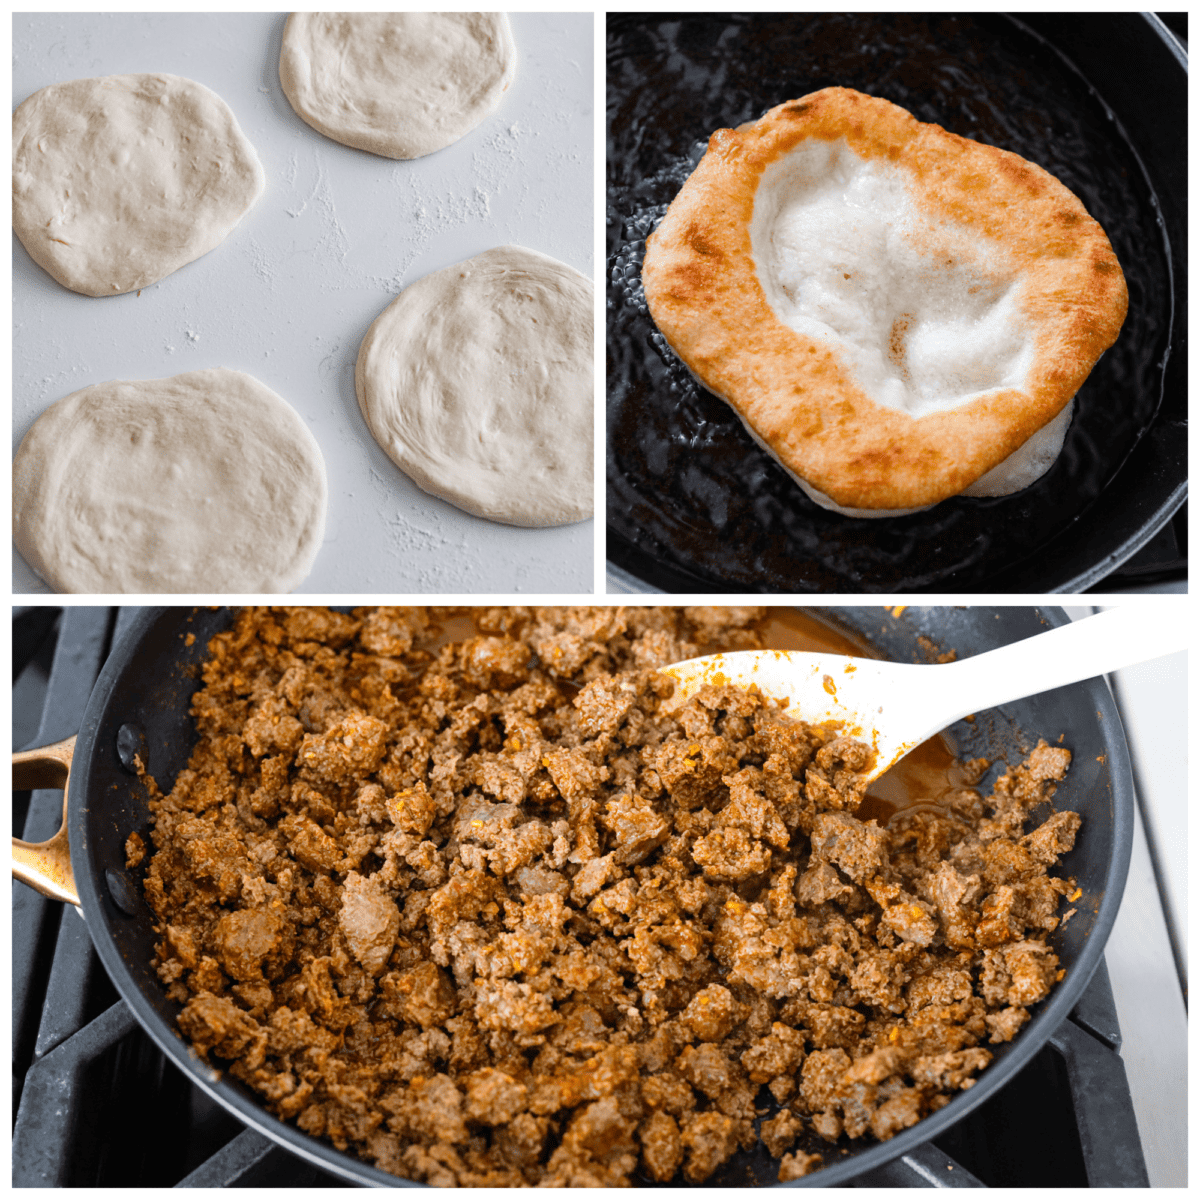 Collage of the wraps being fried and the ground beef being browned in a skillet.